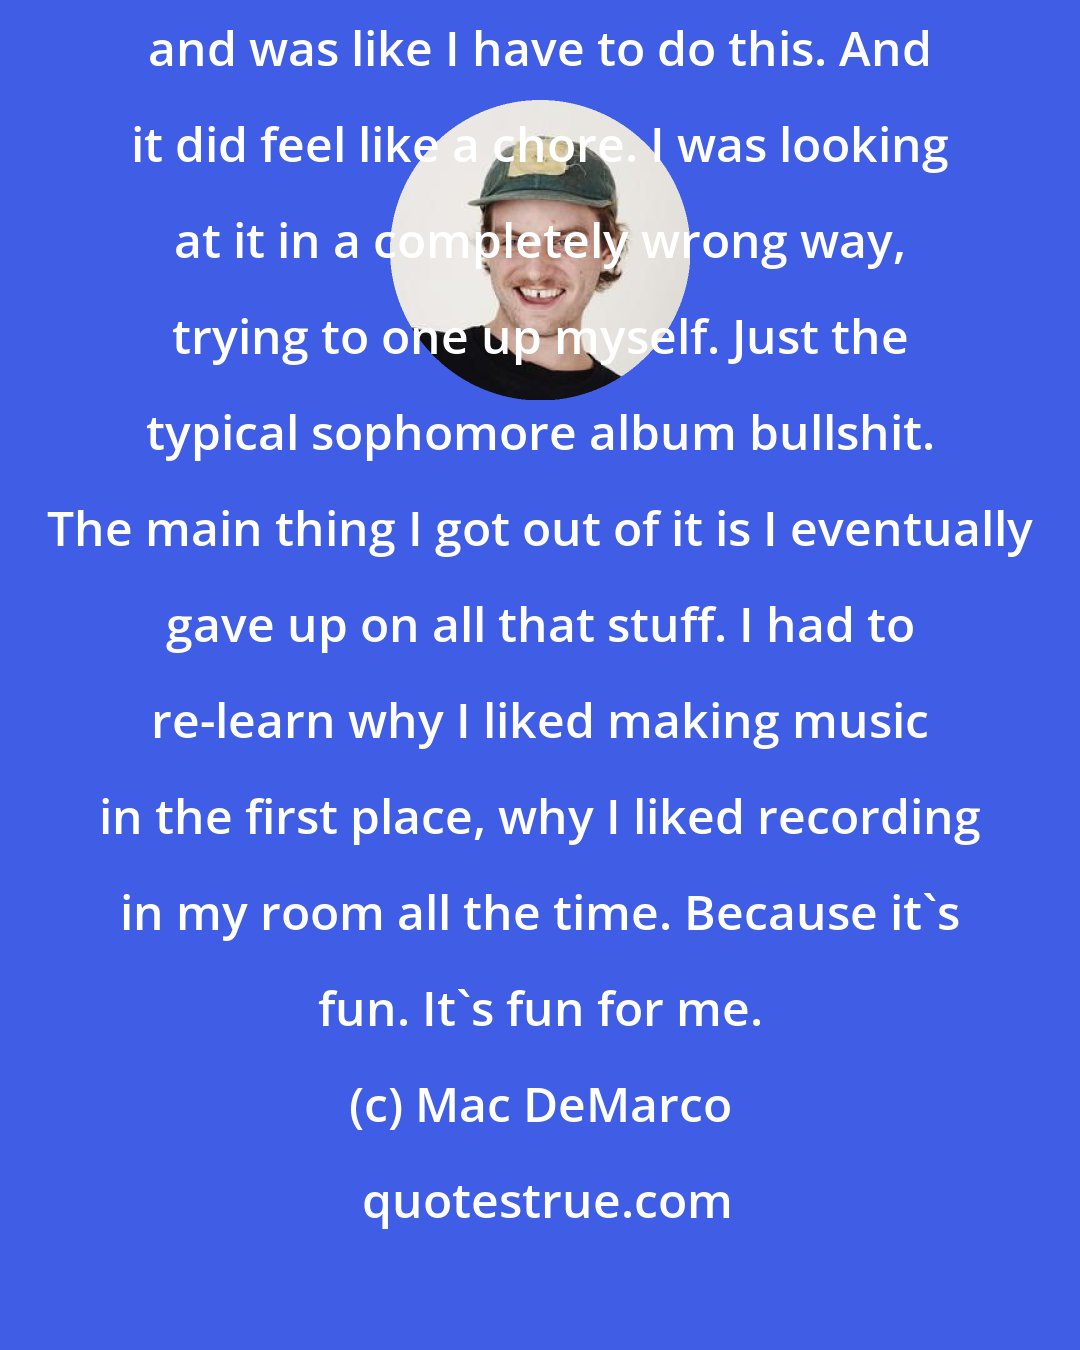 Mac DeMarco: Over a year before I started recording Salad Days, so I finally sat down and was like I have to do this. And it did feel like a chore. I was looking at it in a completely wrong way, trying to one up myself. Just the typical sophomore album bullshit. The main thing I got out of it is I eventually gave up on all that stuff. I had to re-learn why I liked making music in the first place, why I liked recording in my room all the time. Because it's fun. It's fun for me.